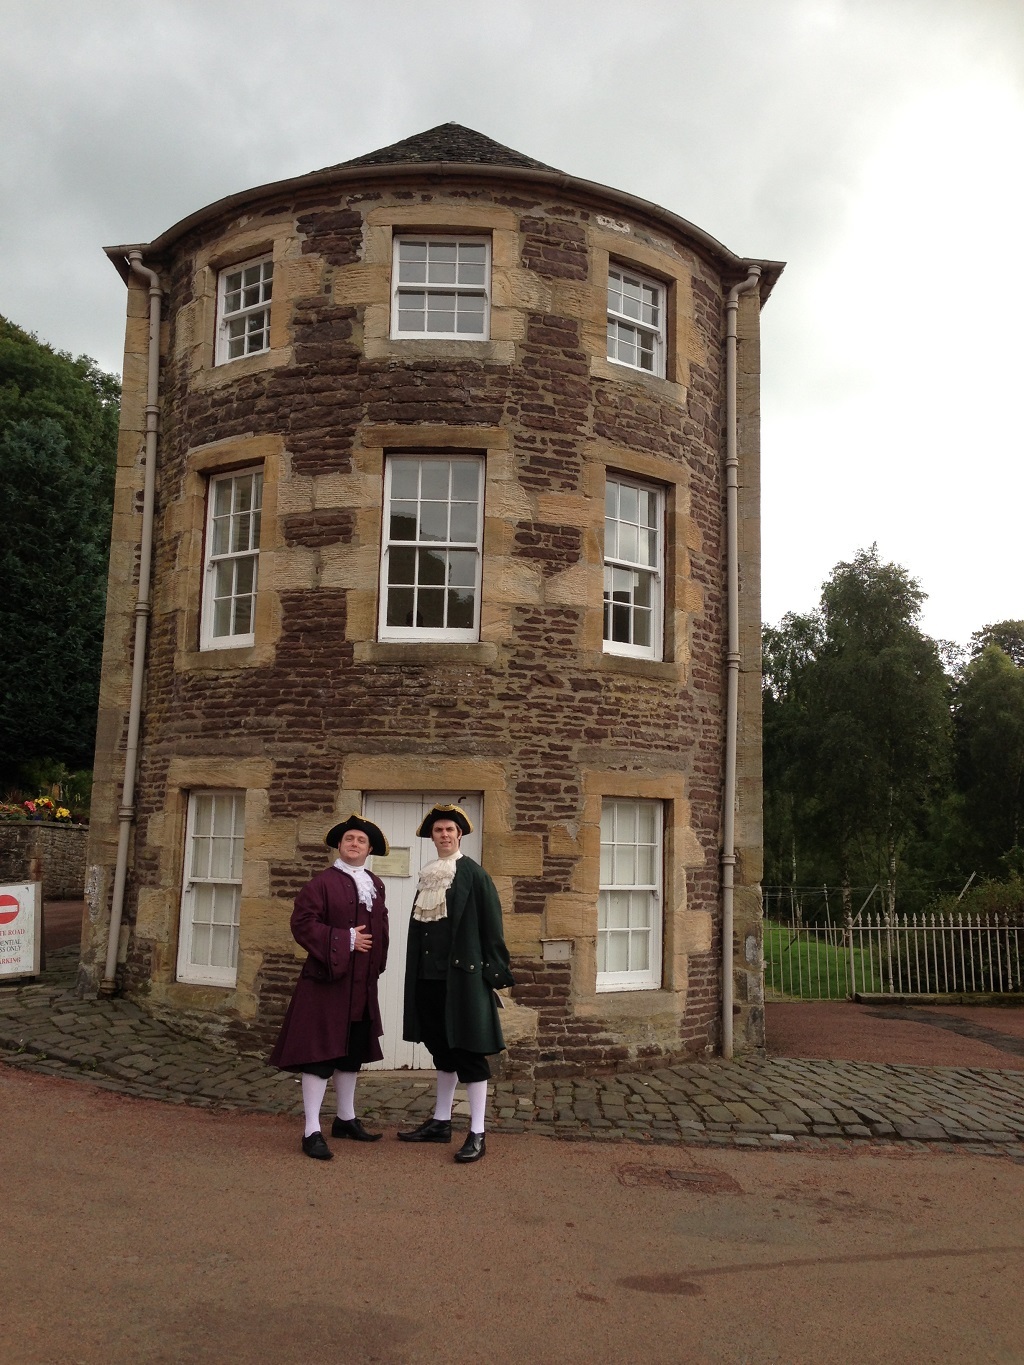 New Lanark’s Counting House